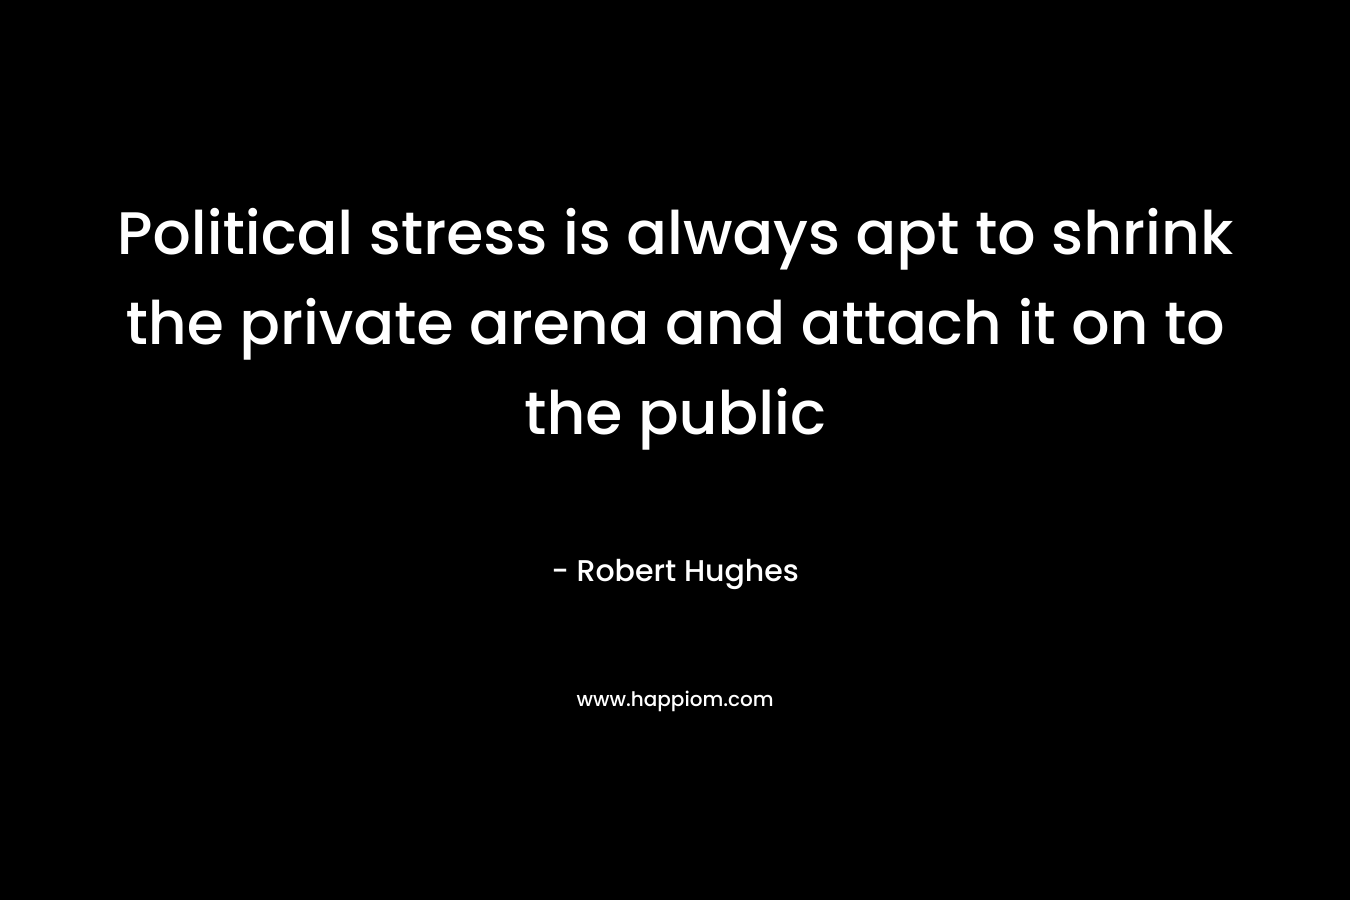 Political stress is always apt to shrink the private arena and attach it on to the public – Robert Hughes